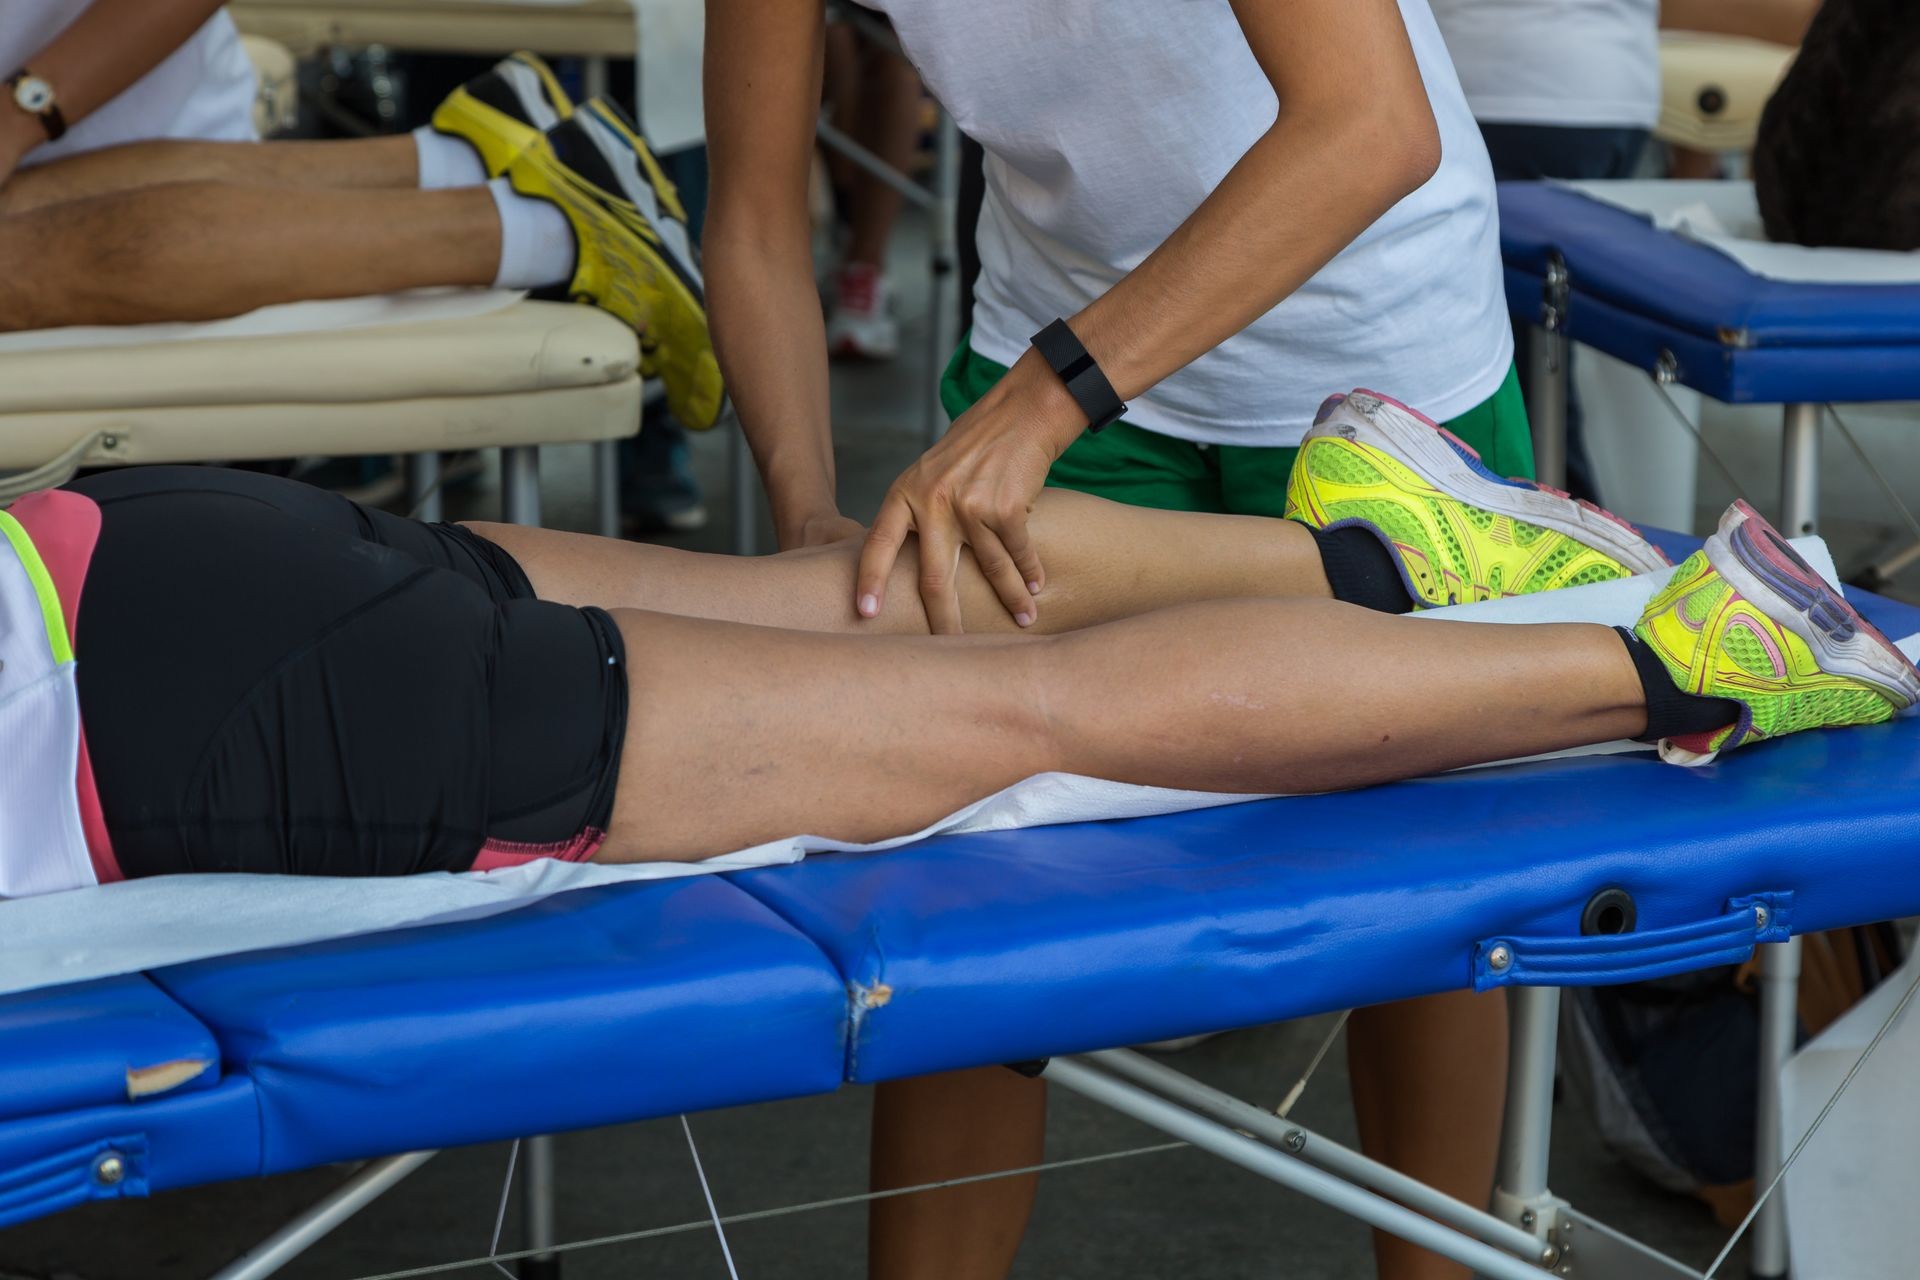 Athlete's Muscles Massage after Sport Workout: Healthcare Theme